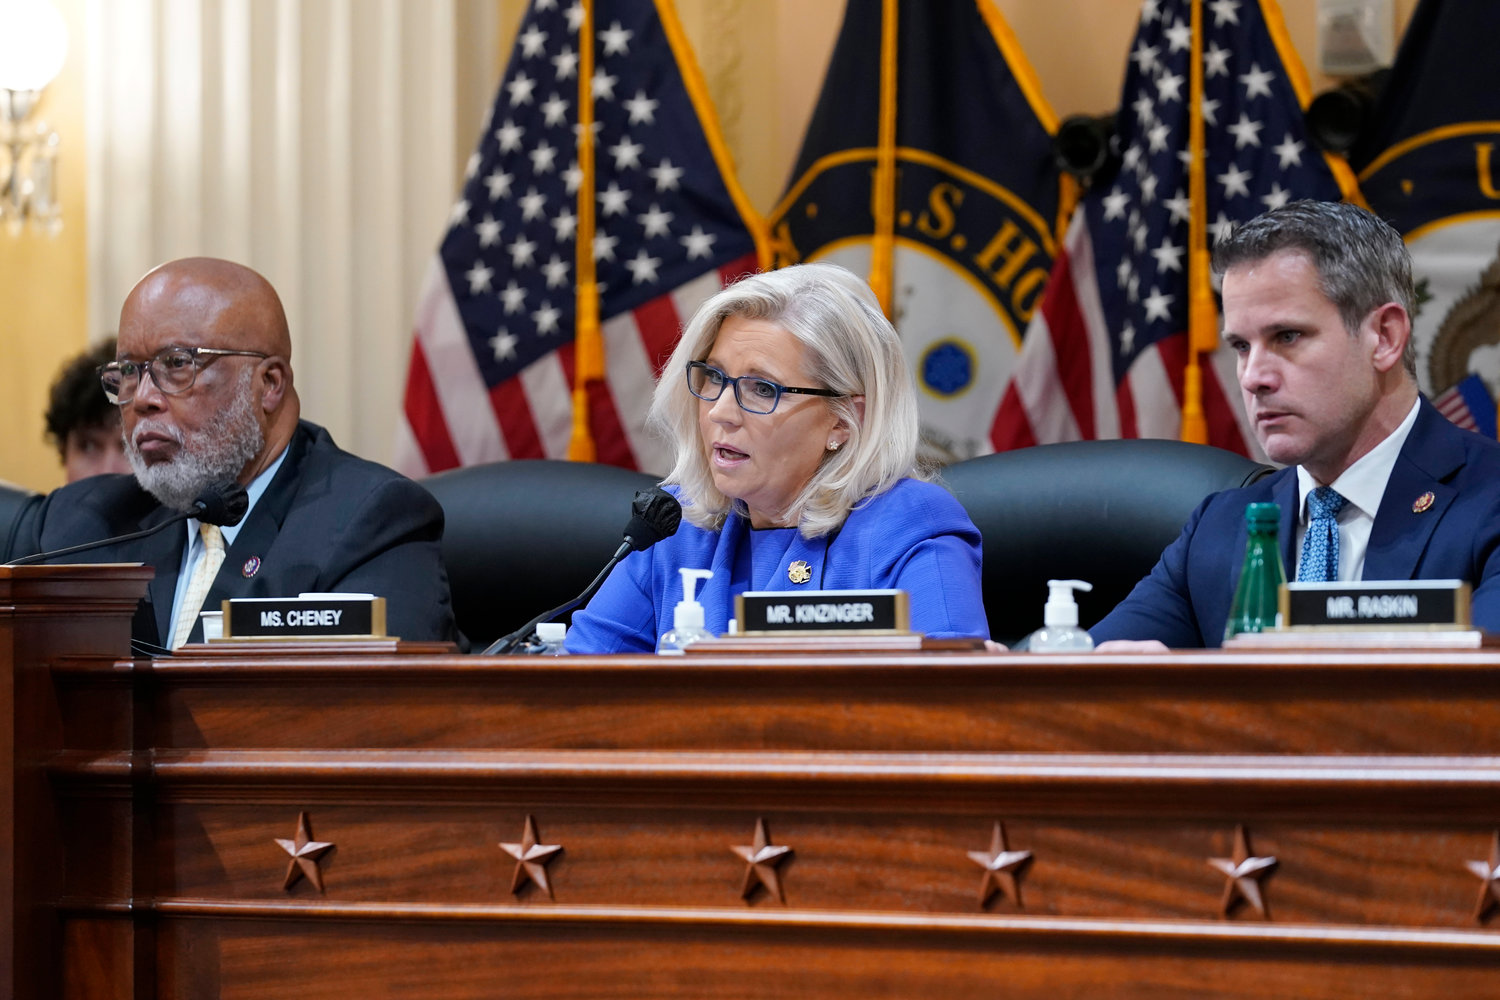 Vice Chair Liz Cheney, R-Wyo., gives her opening remarks as Committee Chairman Rep. Bennie Thompson, D-Miss., left, and Rep. Adam Kinzinger, R-Ill., look on, as the House select committee investigating the Jan. 6 attack on the U.S. Capitol holds its first public hearing to reveal the findings of a year-long investigation, at the Capitol in Washington, Thursday, June 9, 2022. (AP Photo/J. Scott Applewhite)